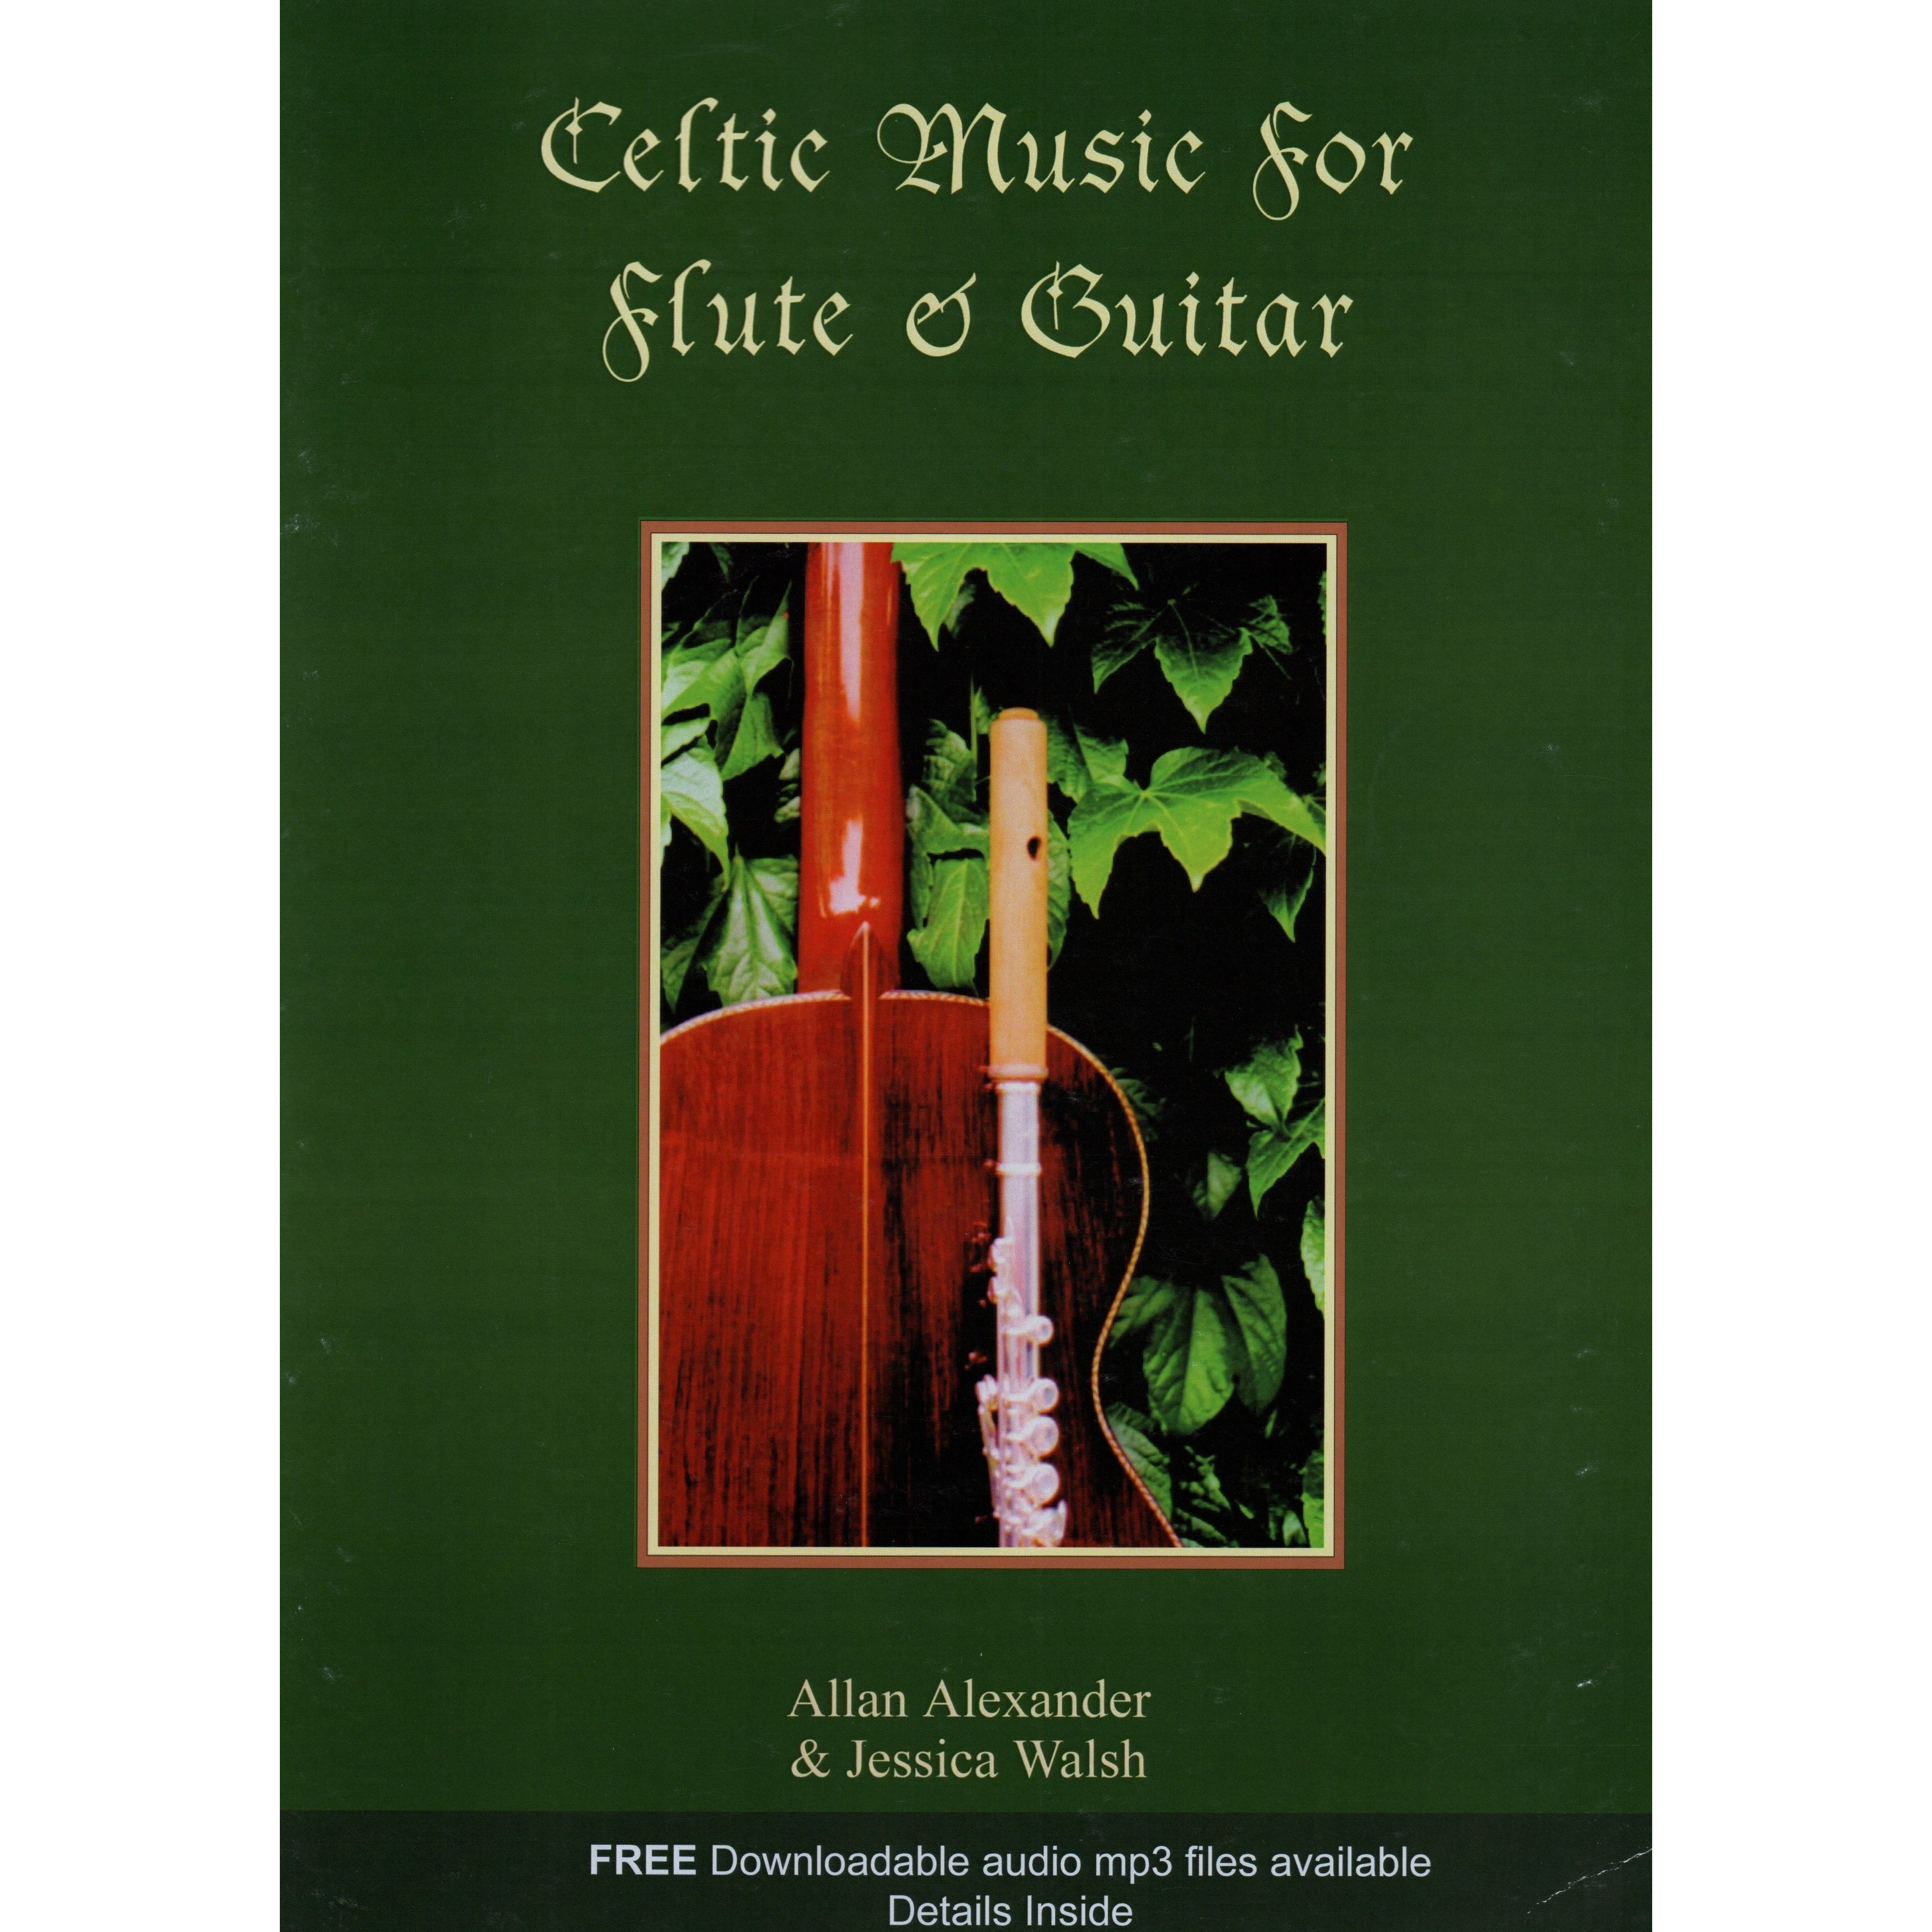 Celtic Music For Guitar Learn to Play Irish Scottish Traditional Music Book & CD 